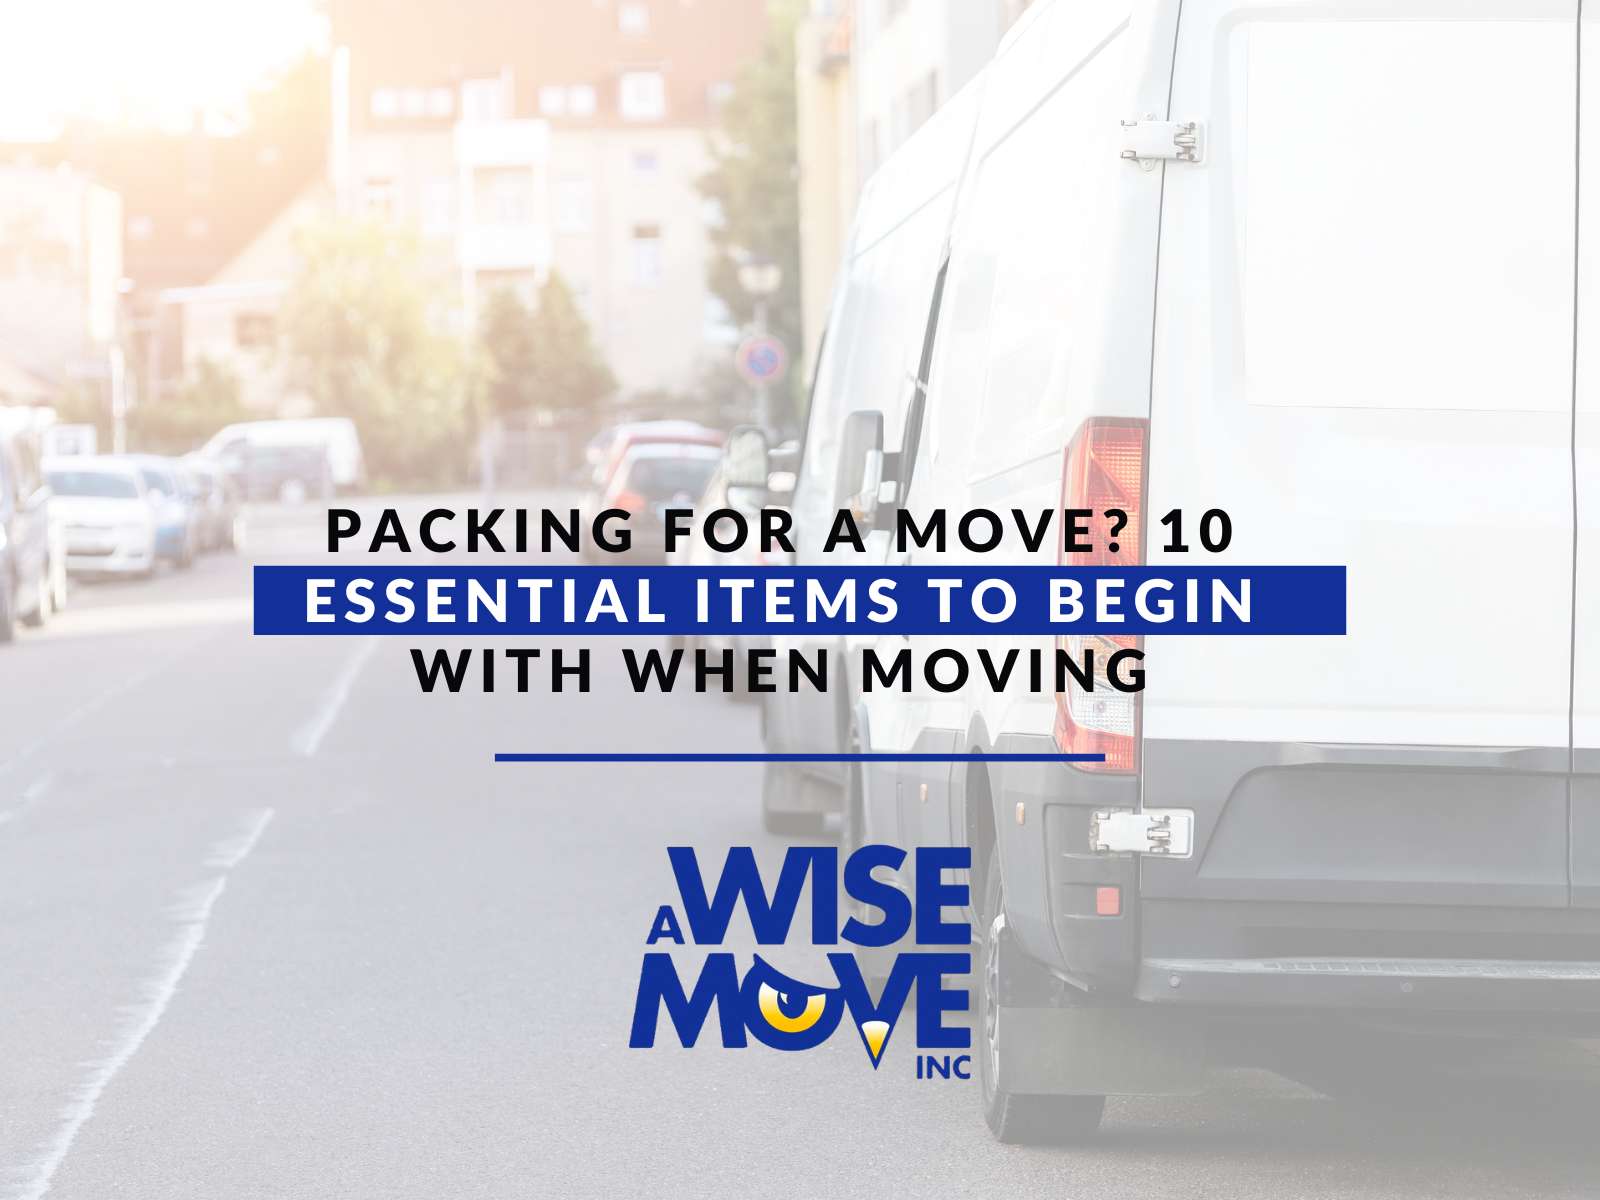 Packing For A Move 10 Essential Items To Begin With When Moving